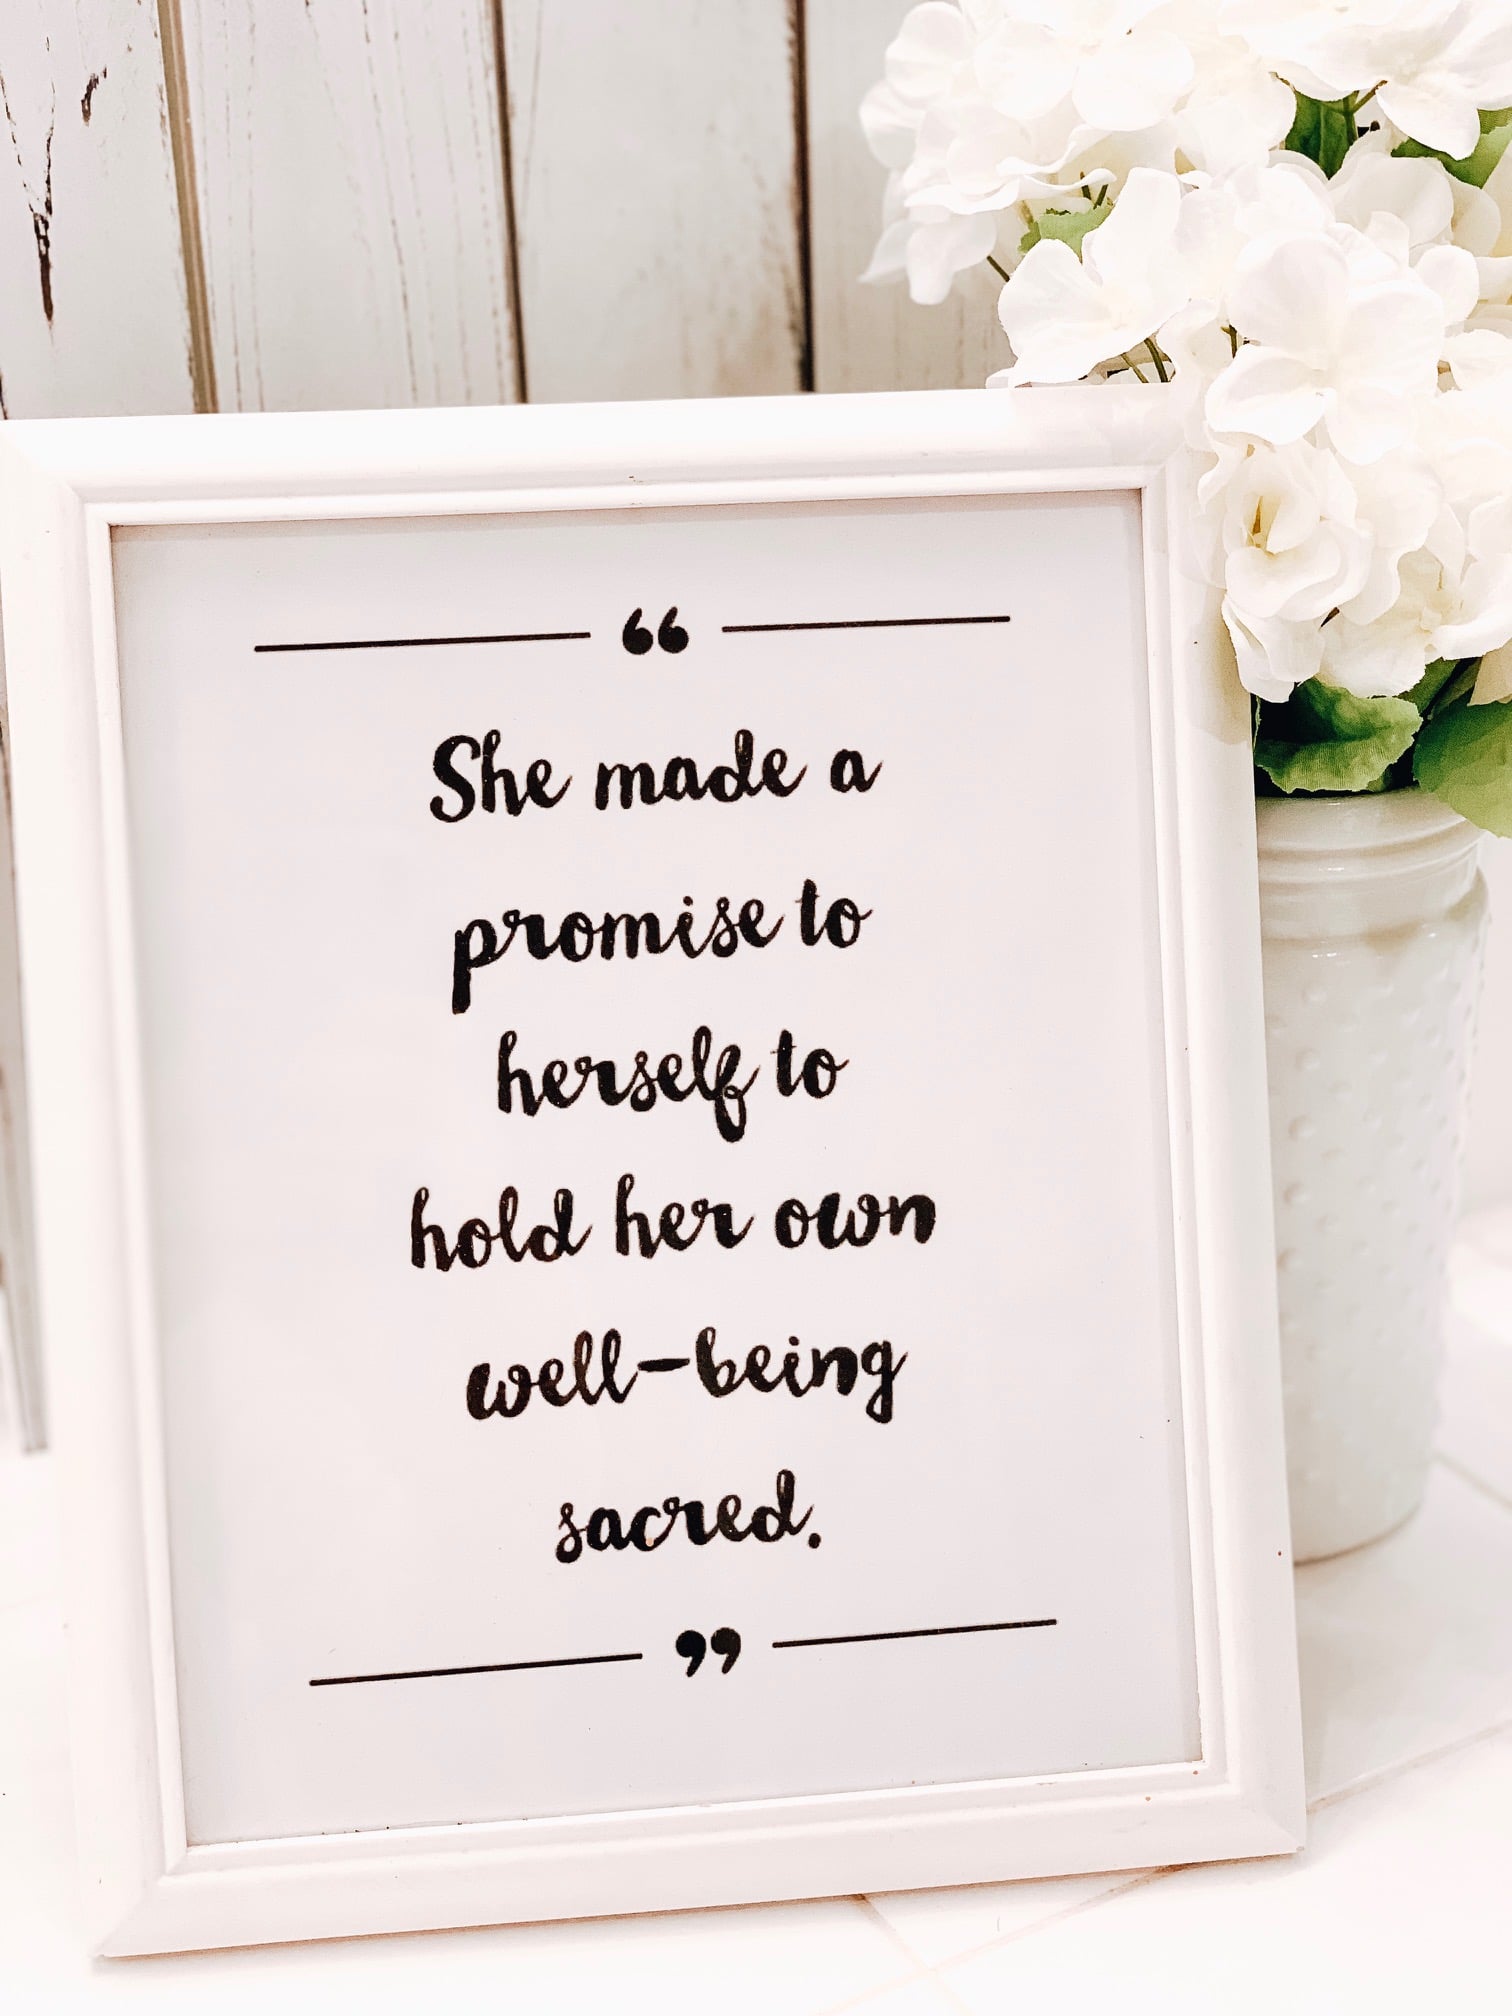 Framed Self-care quote